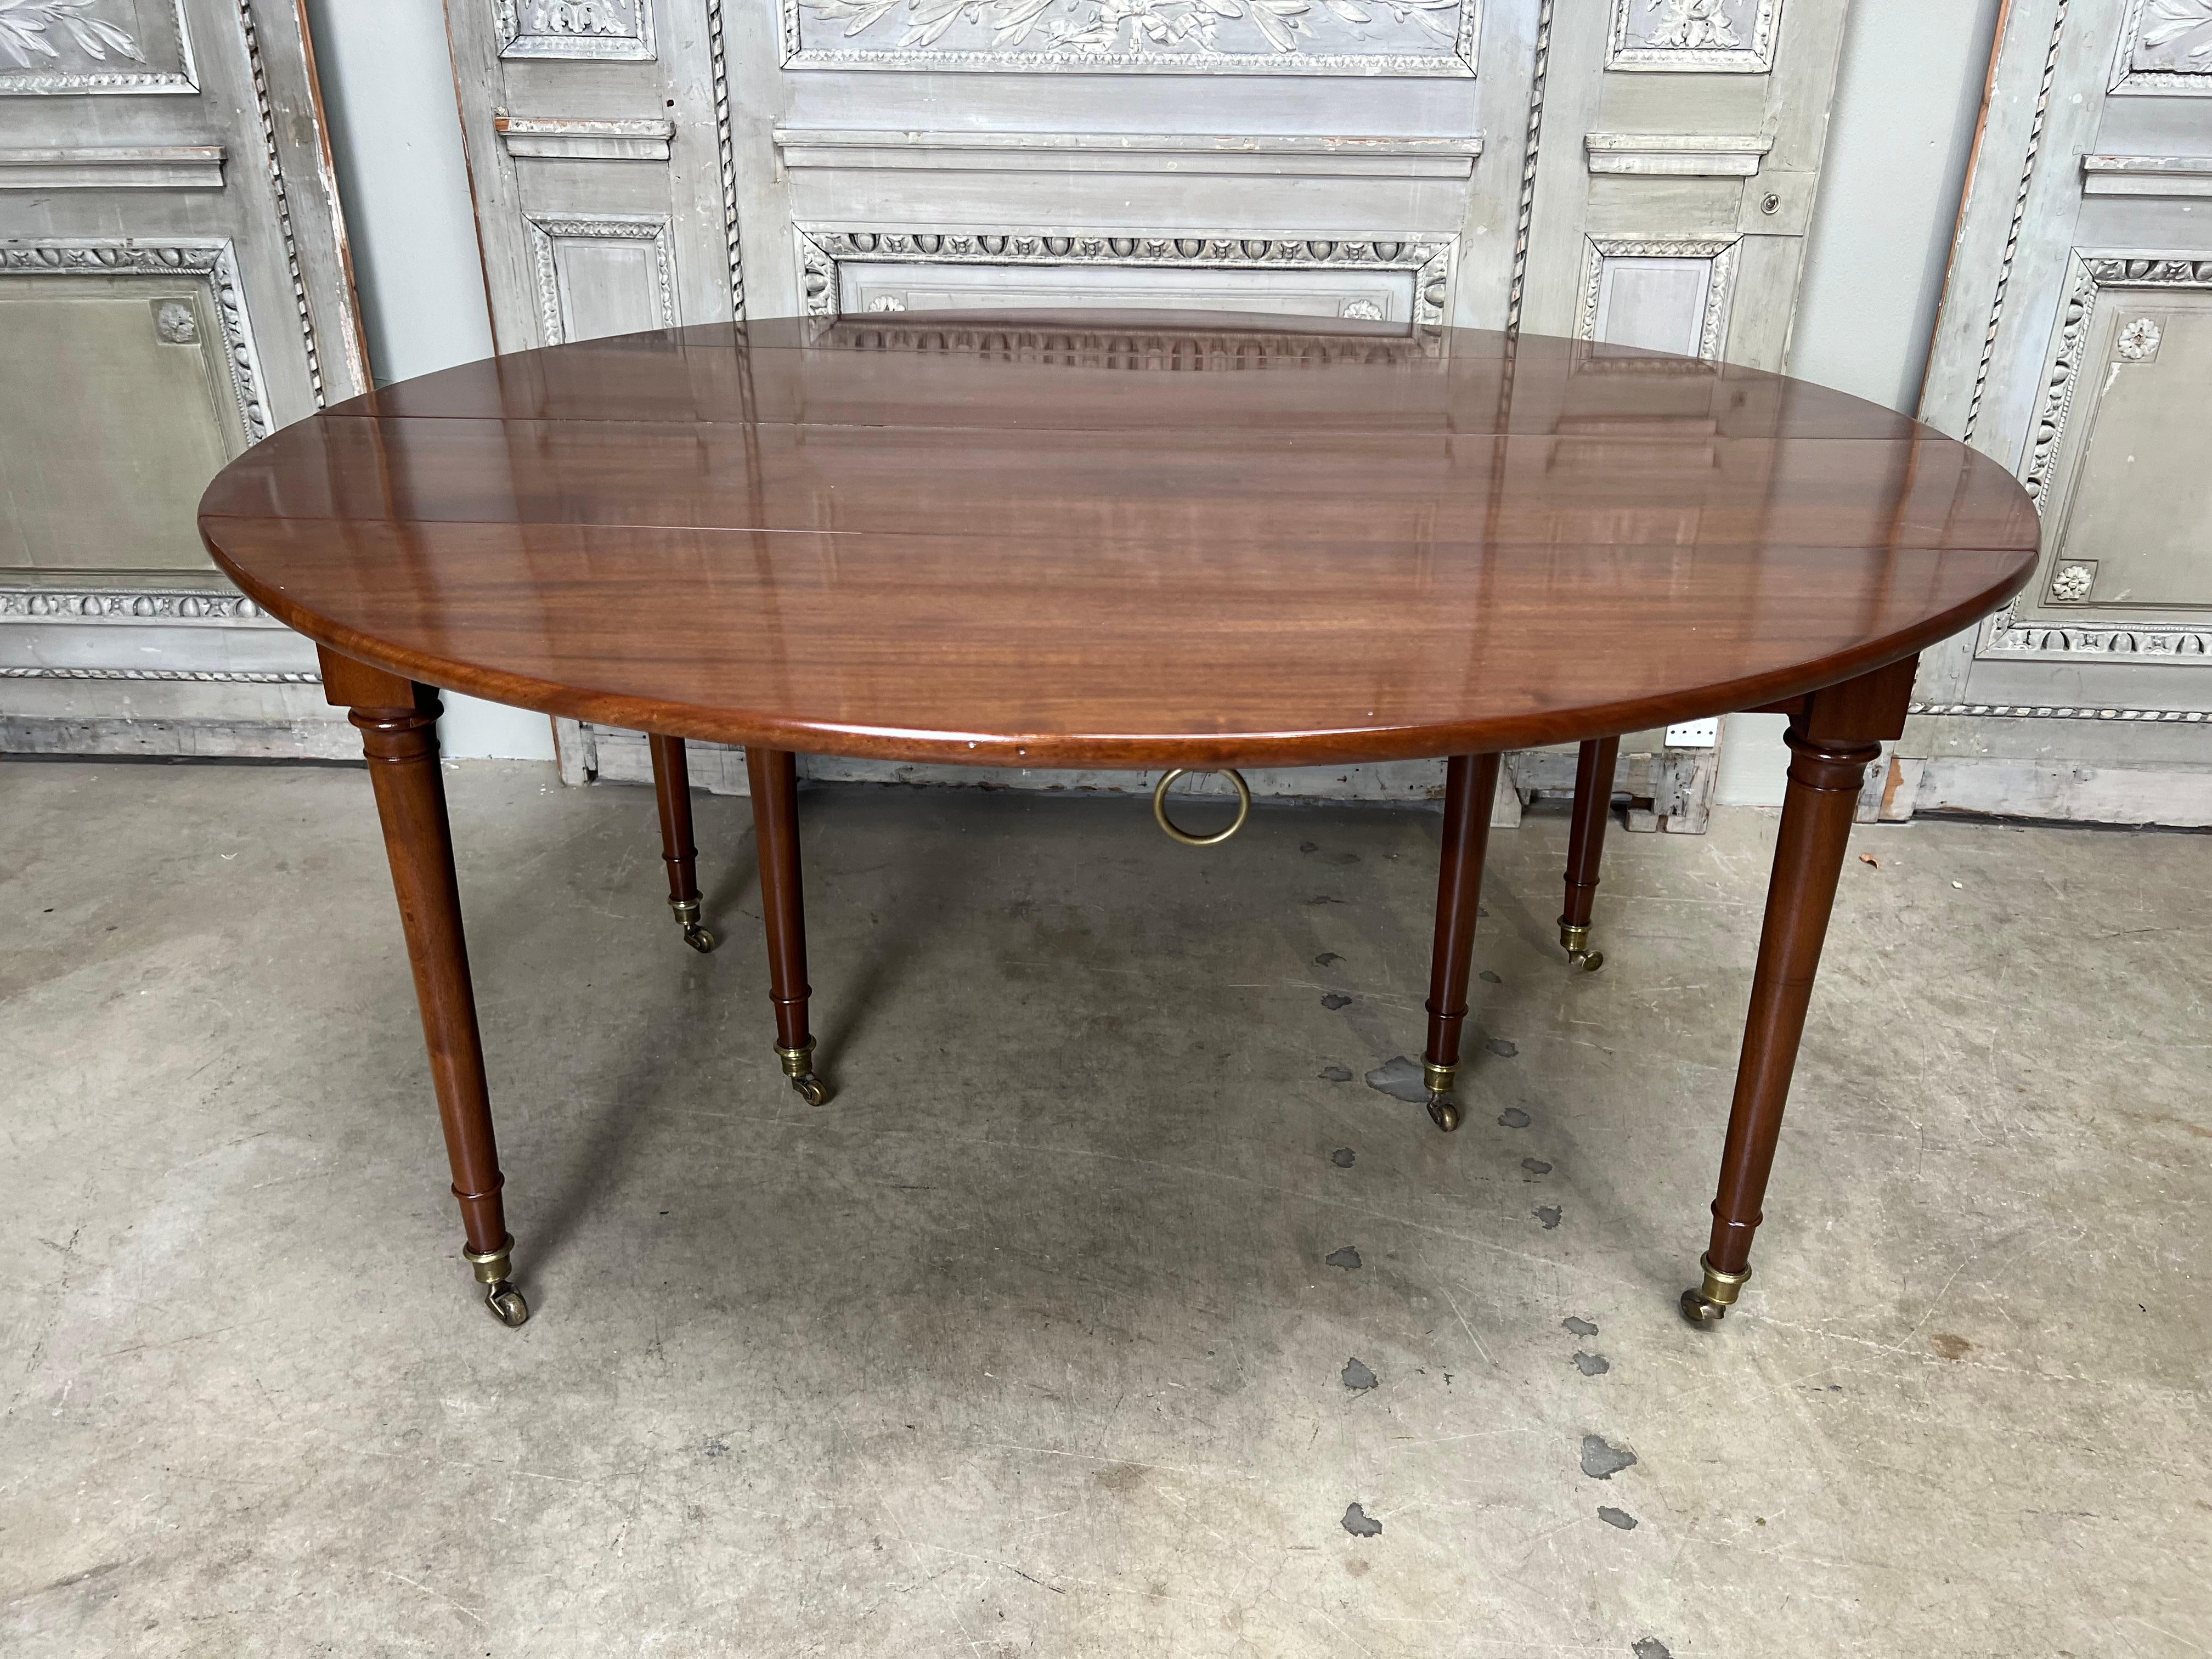 A large French Louis XVI mahogany extension dining table with five leaves 
This exceptional table is highly decorative and very functional with many lengths available with the addition or subtraction of the leaves.  The table has beautiful old